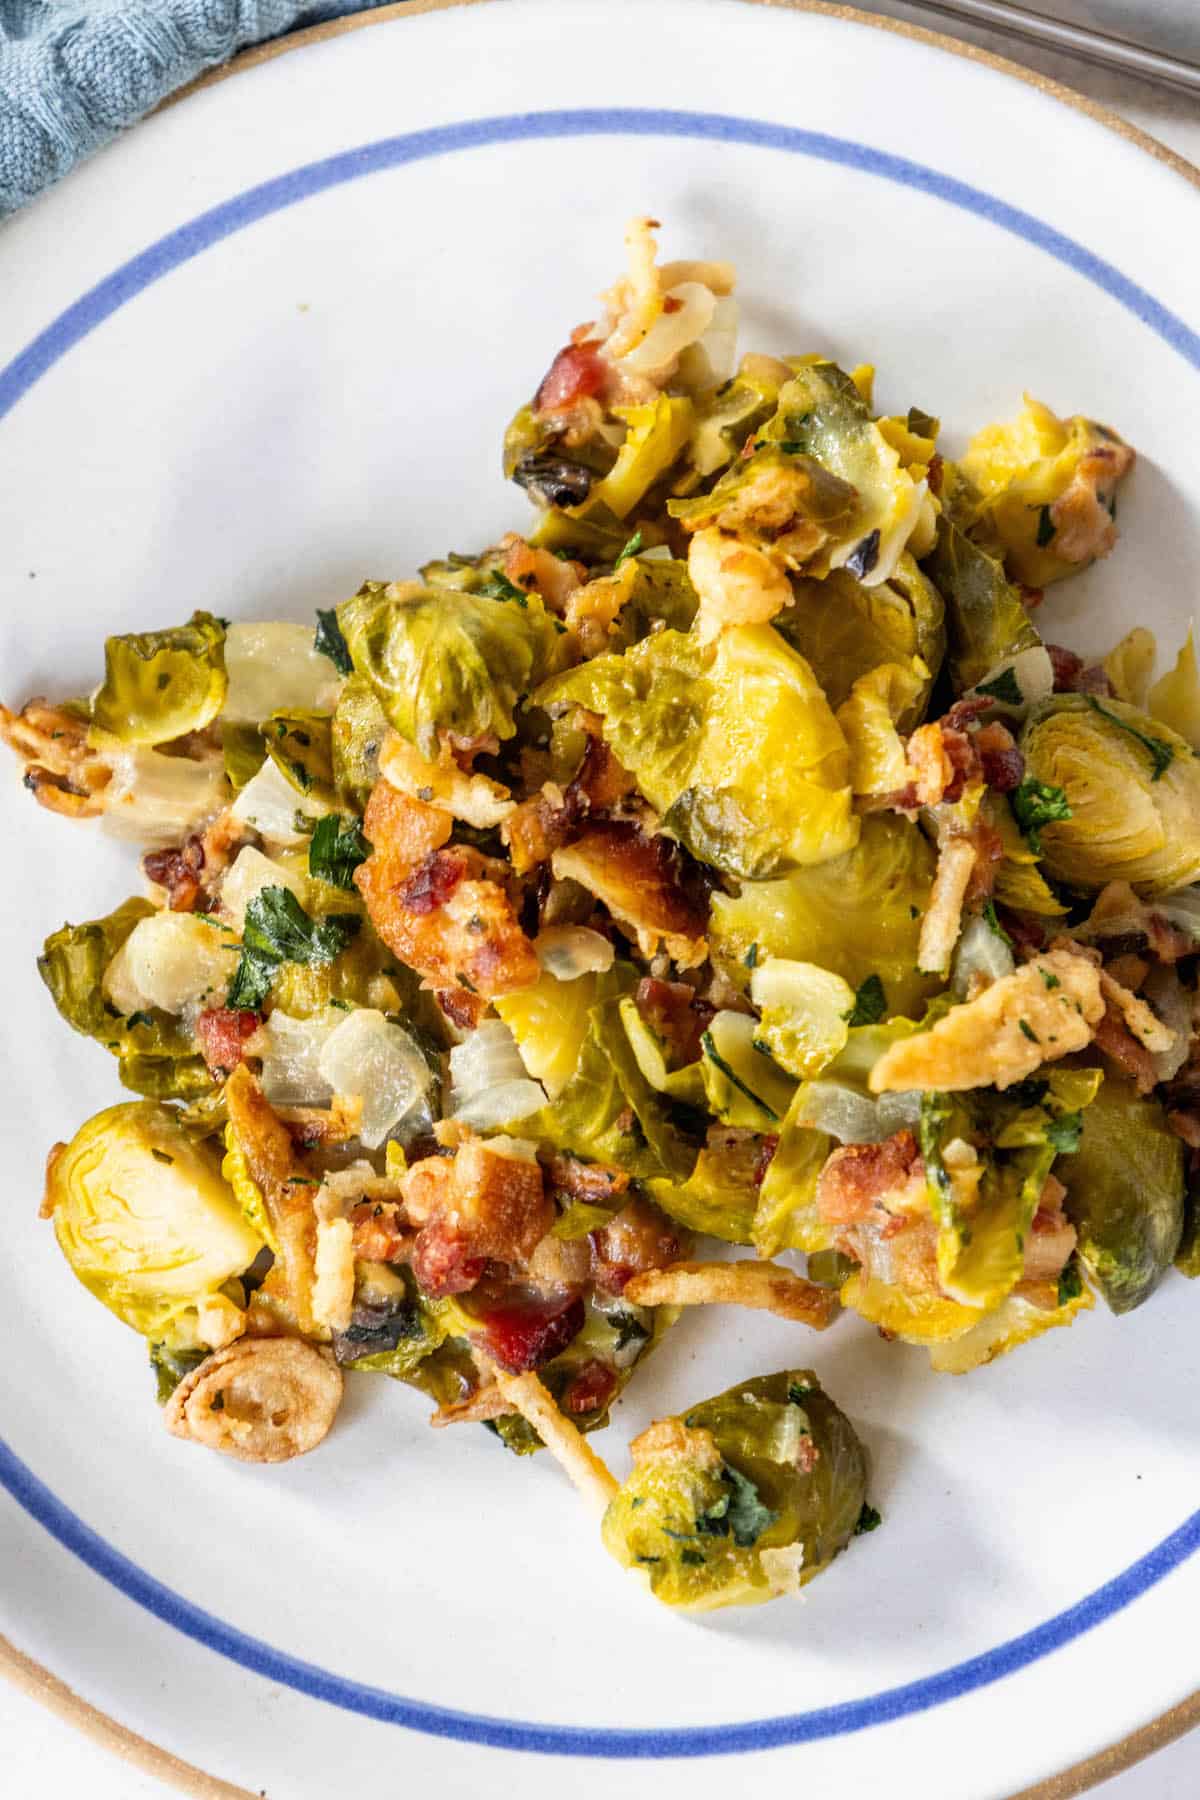 Creamy Brussels sprouts and bacon on a plate.